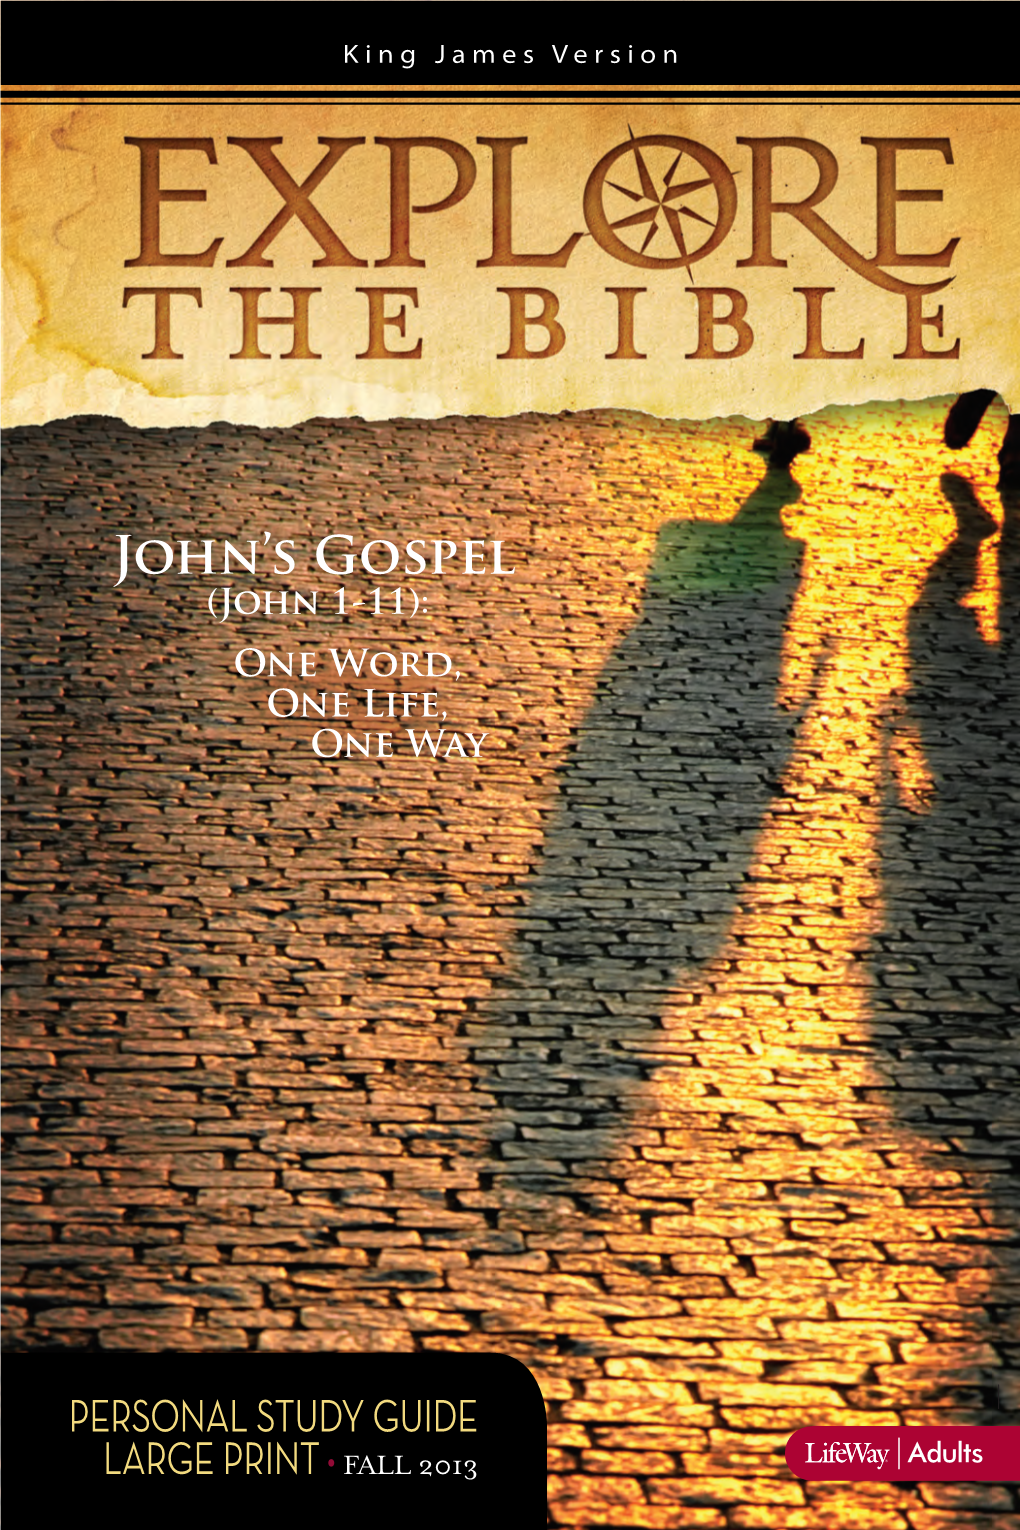 Explore the Bible Personal Study Guide | King James Version